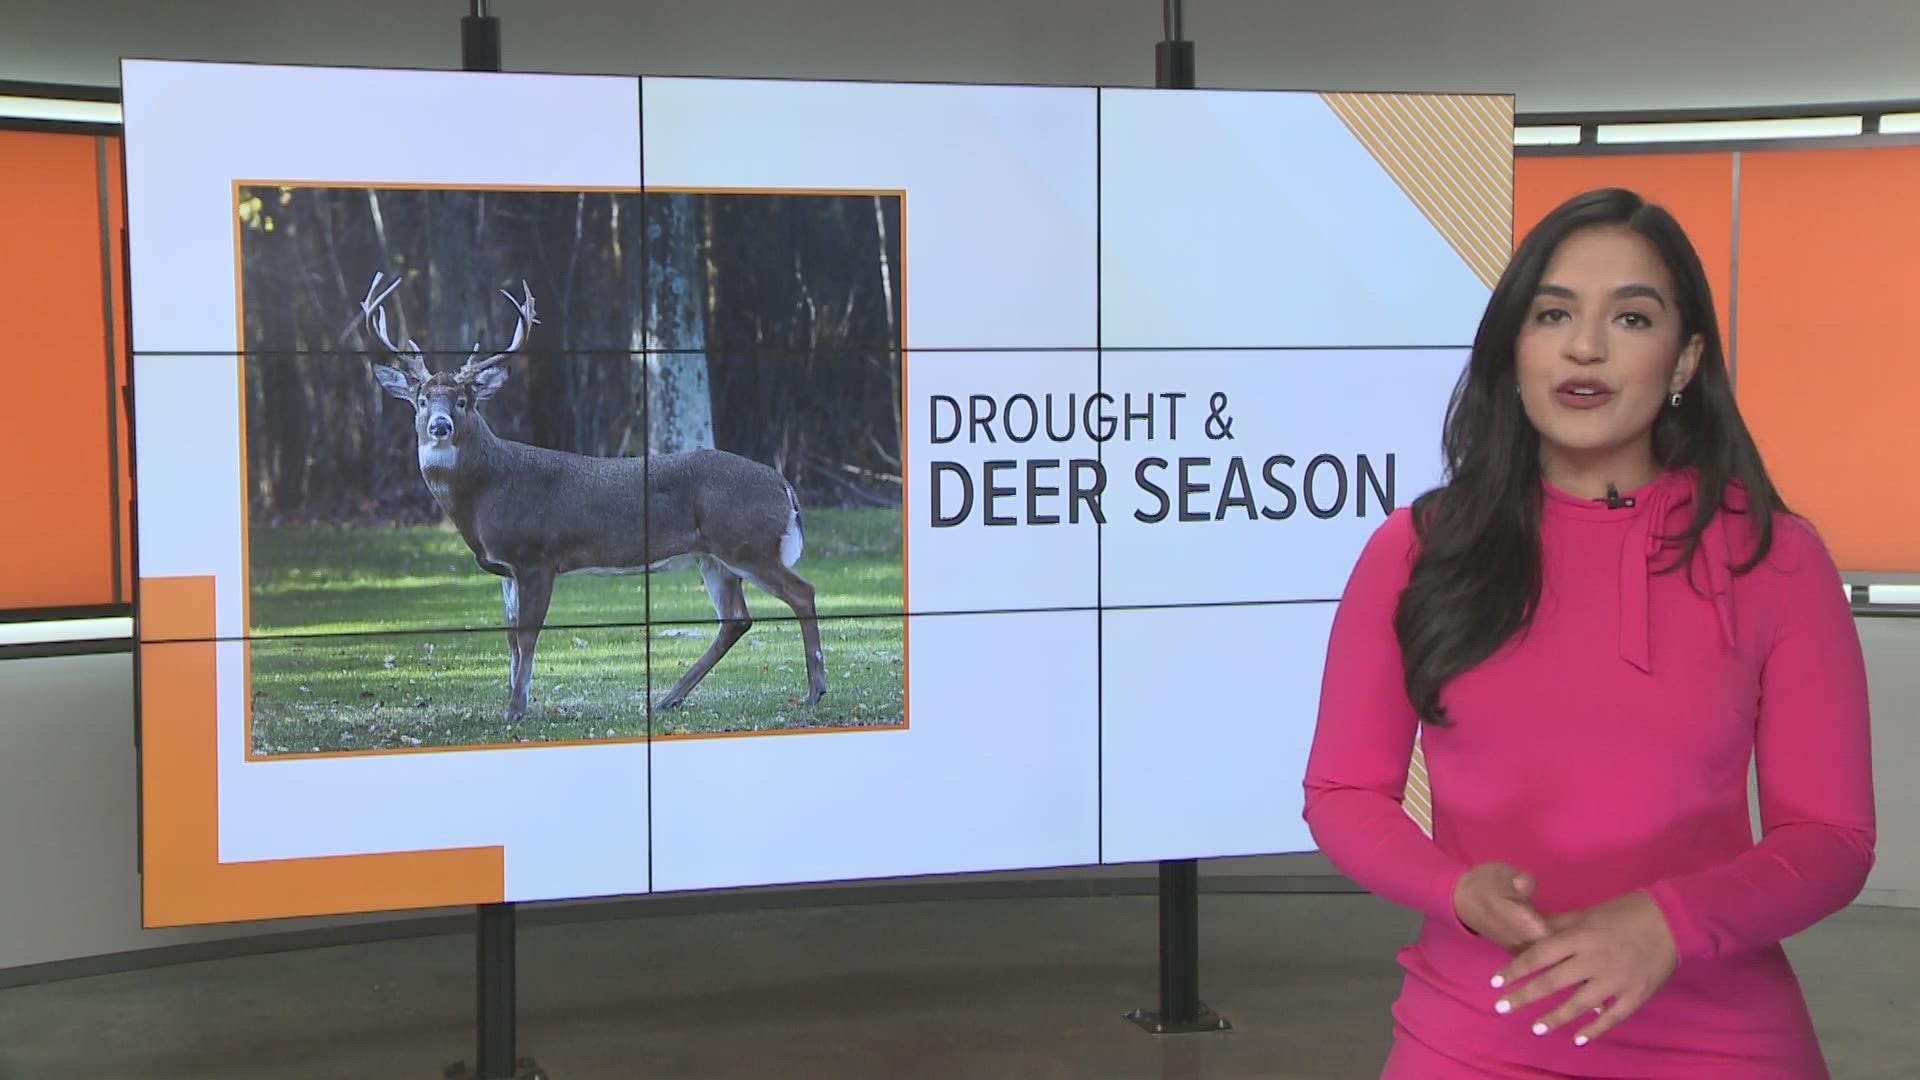 Hunting is one of the biggest fall activities in Texas. But as hunters prepare for the start of deer season, there are some things they should keep in mind.